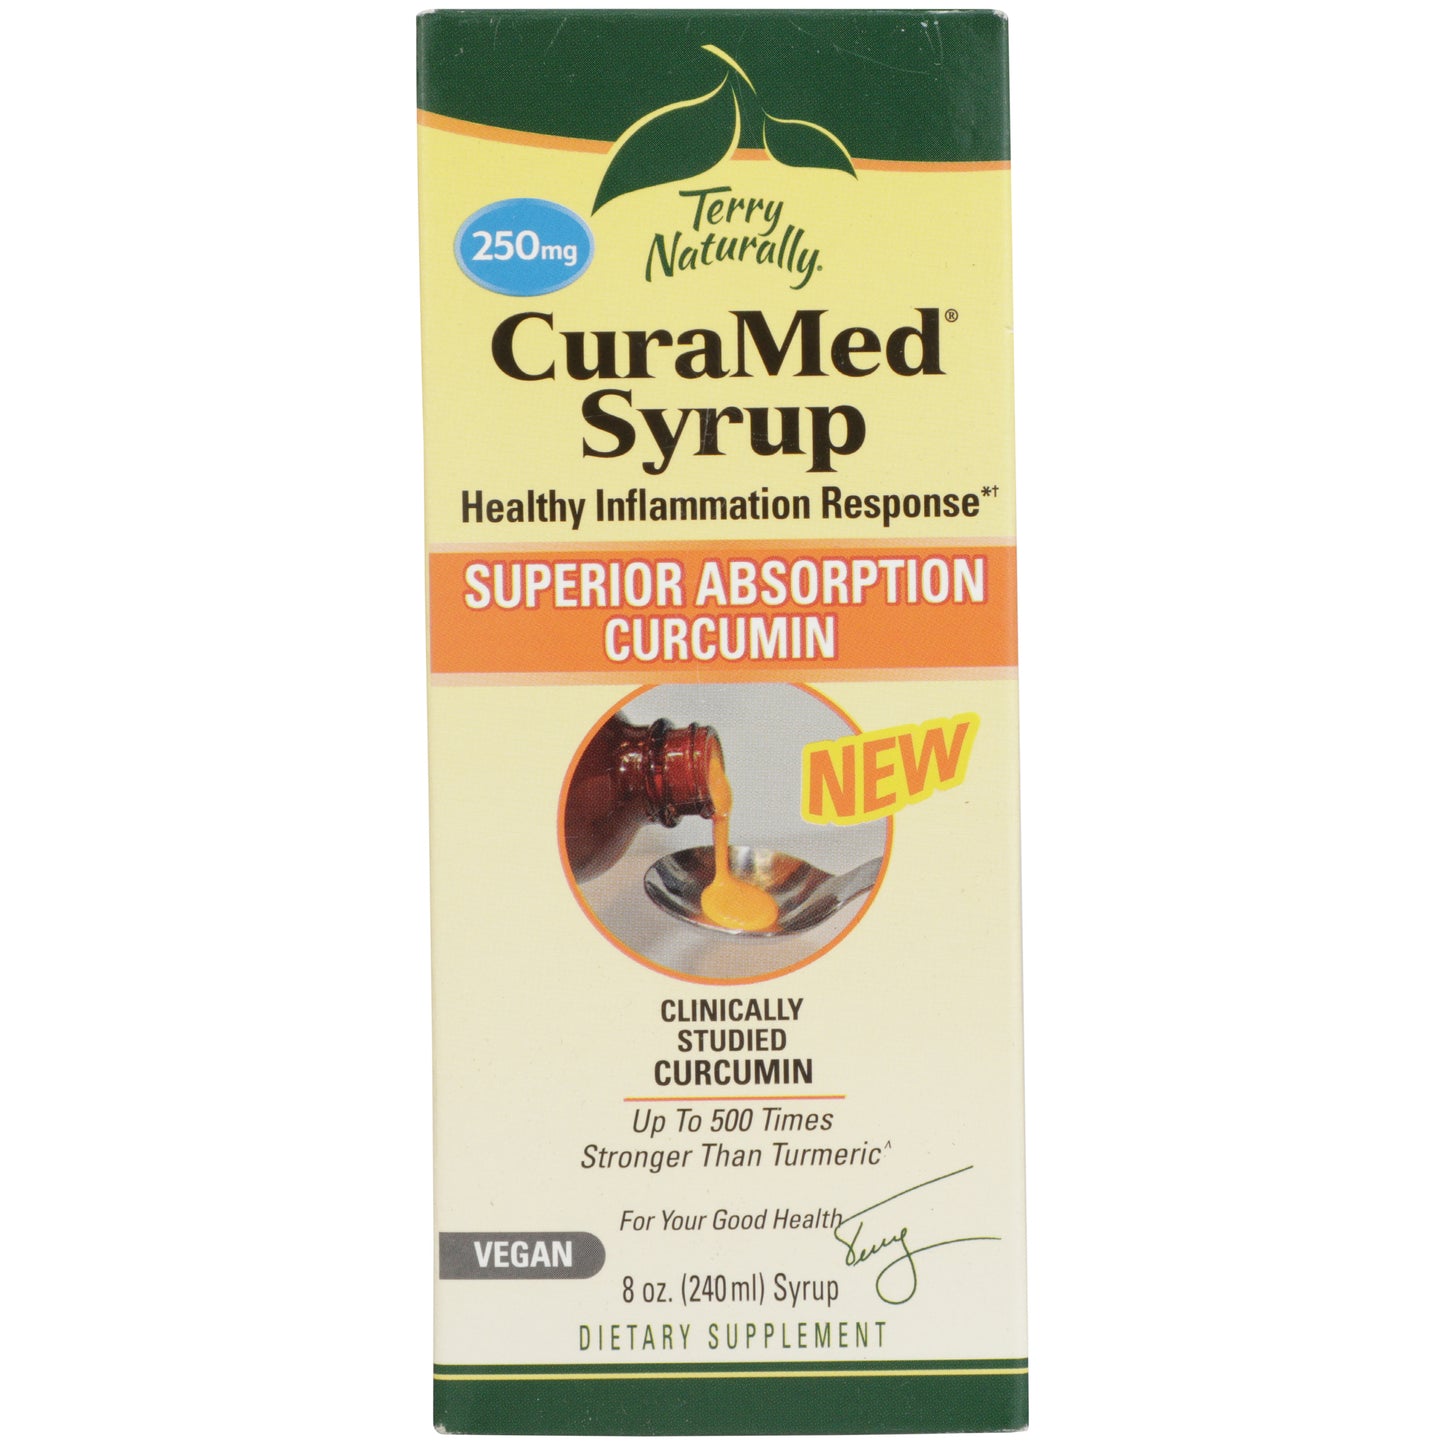 Terry Naturally CuraMed Syrup 8 oz